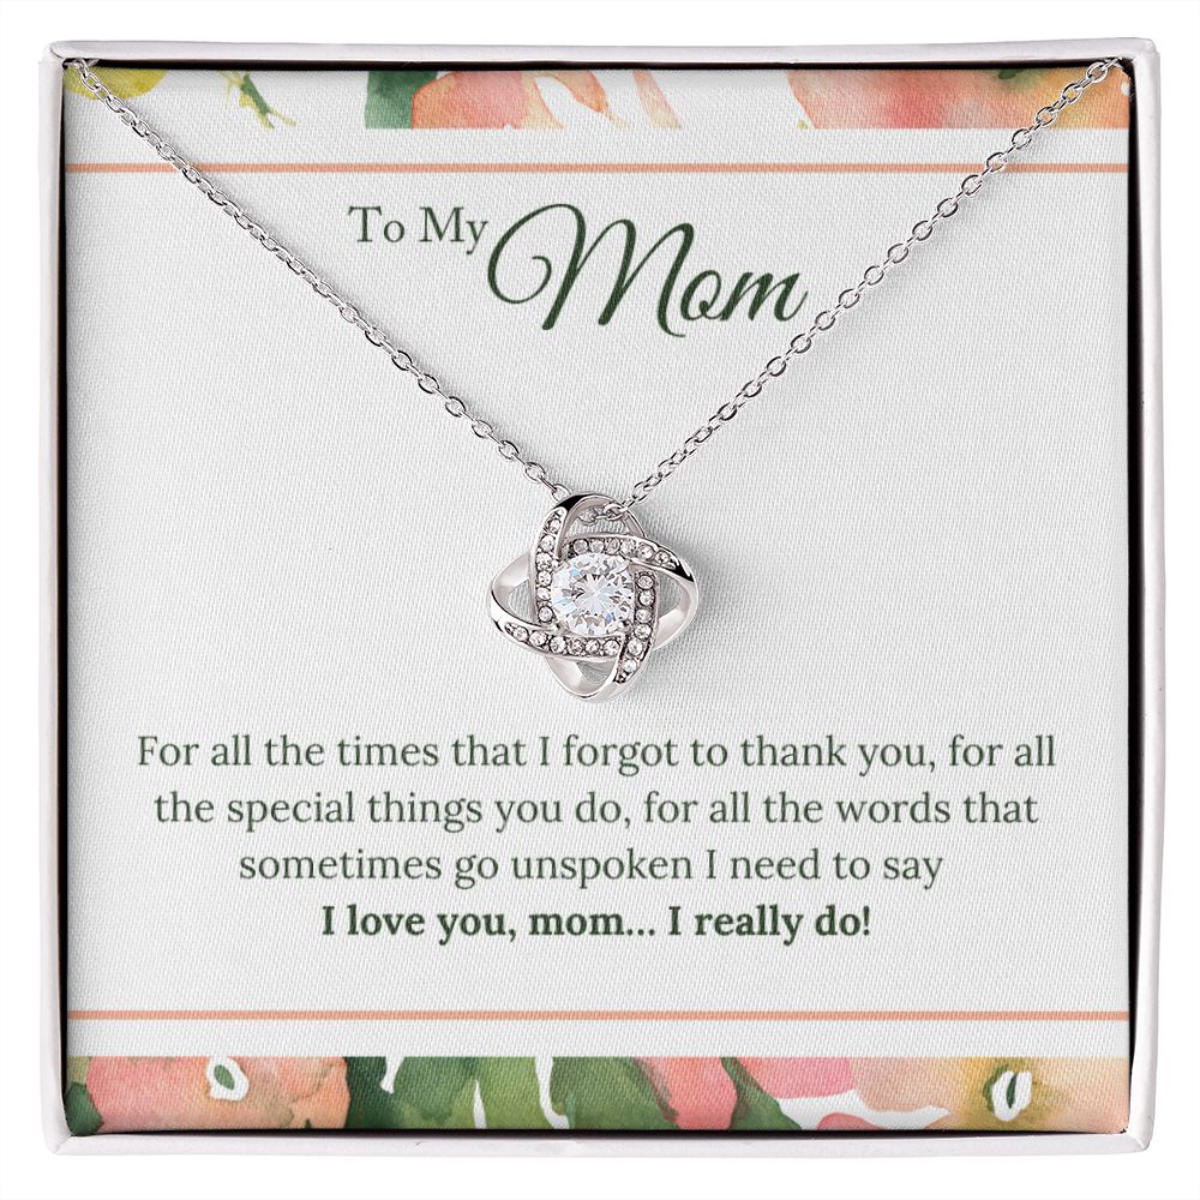 To Mum - Love Knot Necklace For Mum - I Love You Forever